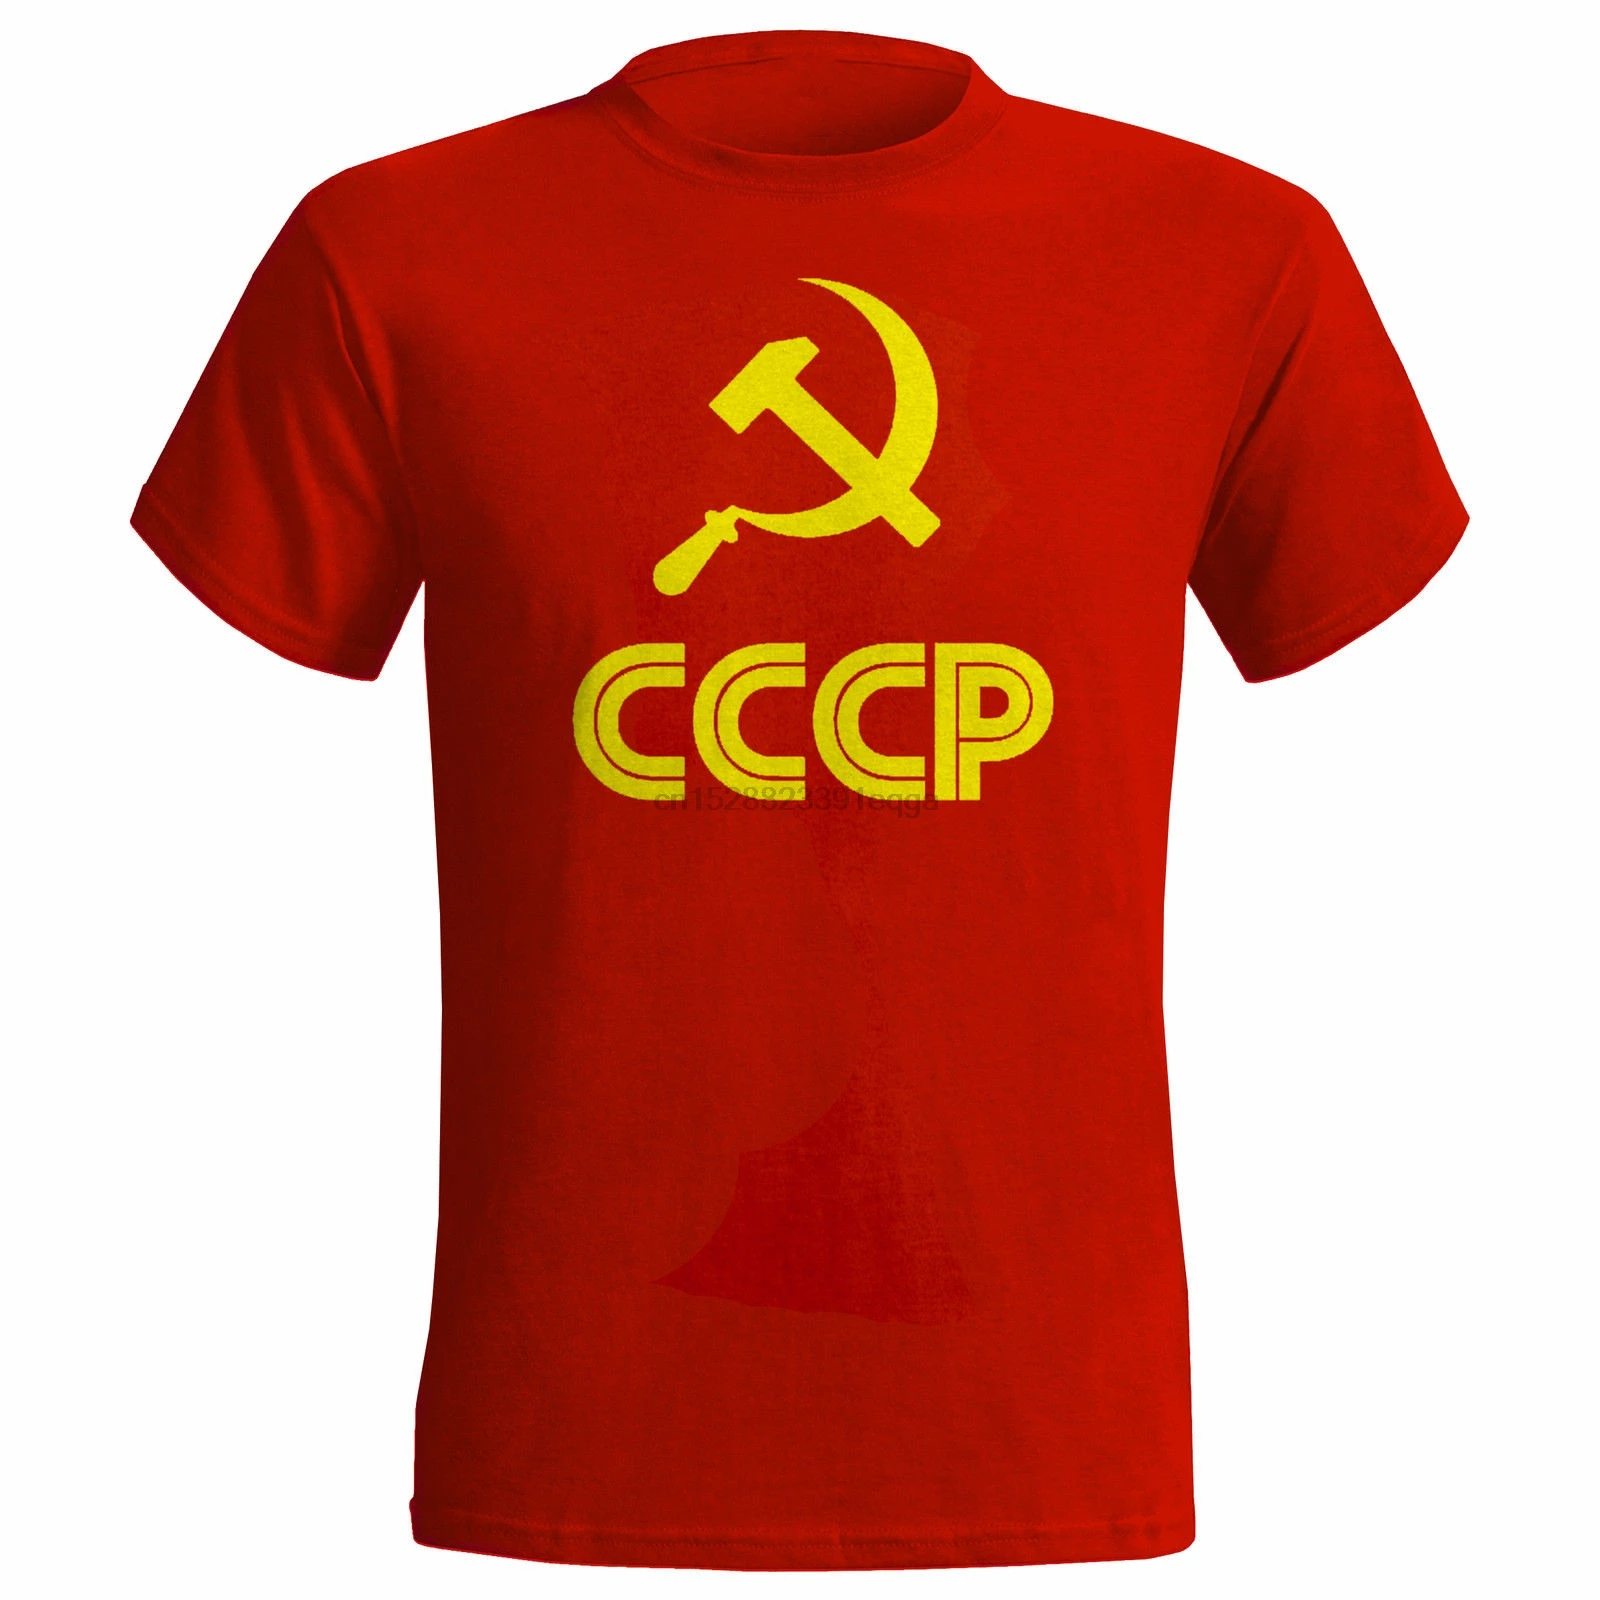 CCCP Soviet Union T shirt Russian Communits USSR T shirt All Sizes Black and Red